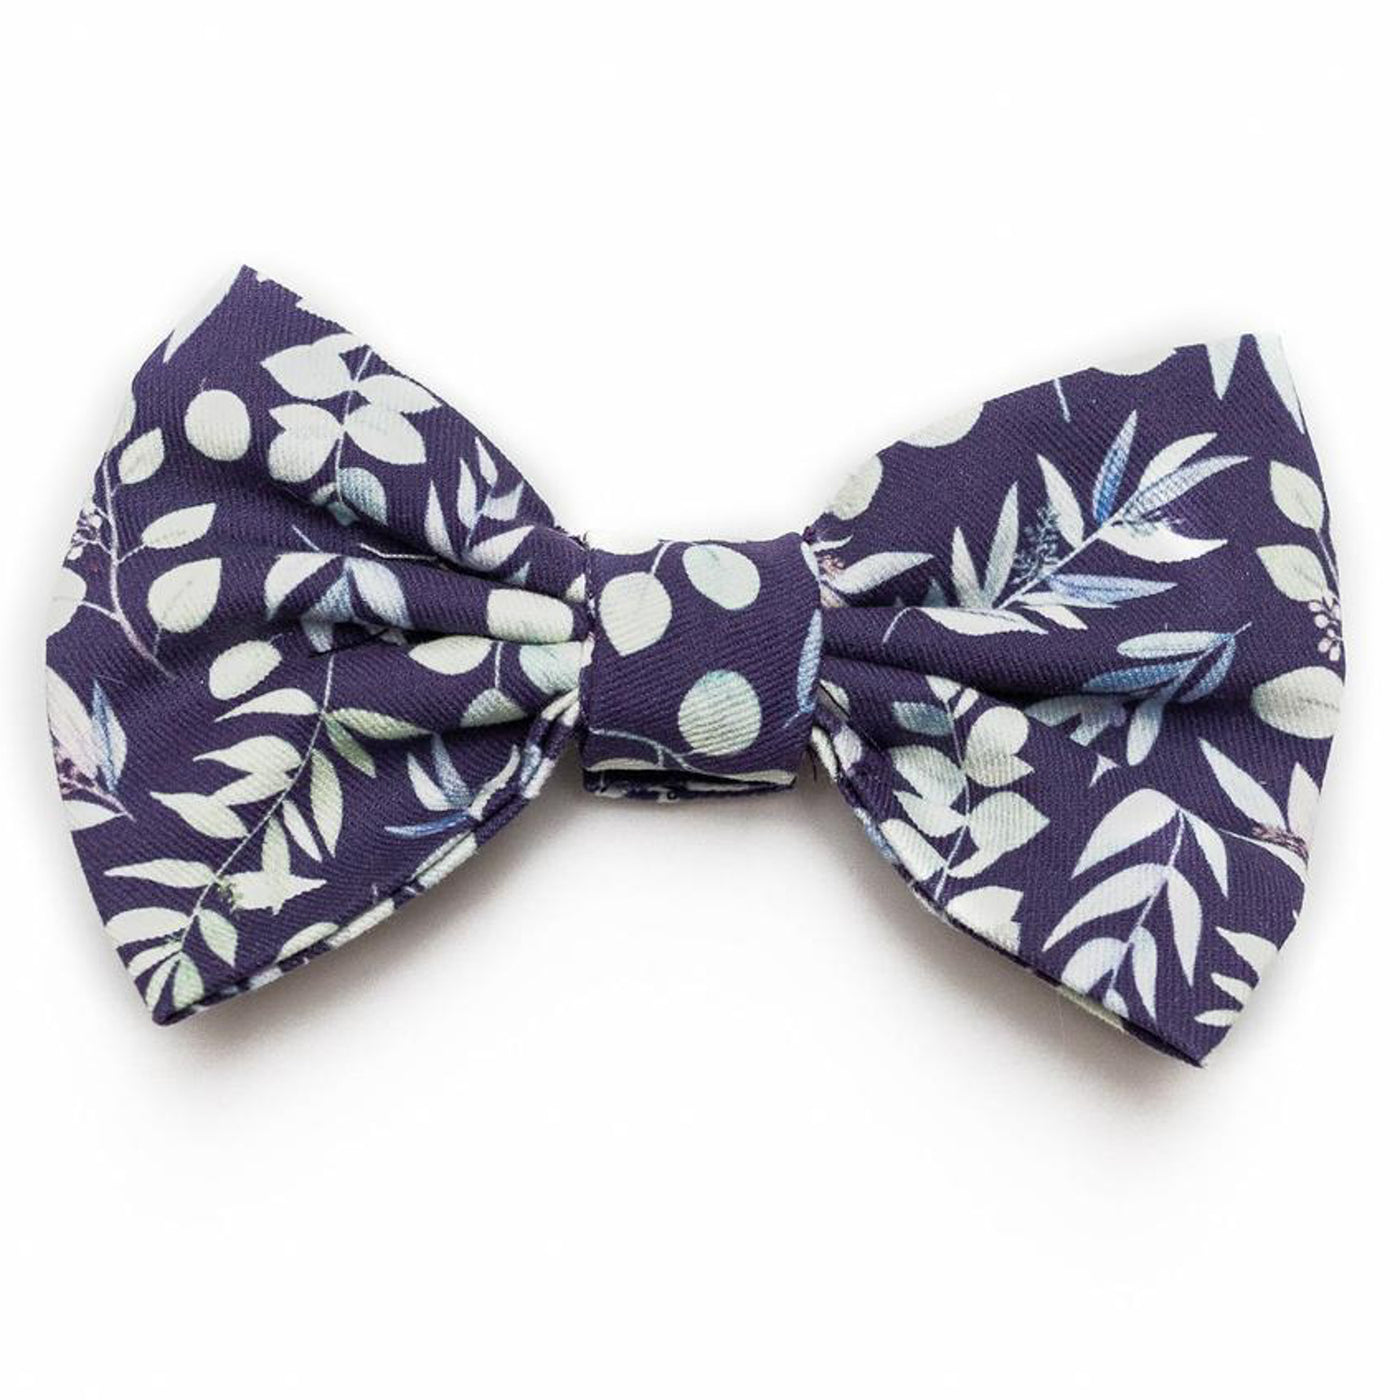 Classic dog bow tie in indigo background with mult-color foliage